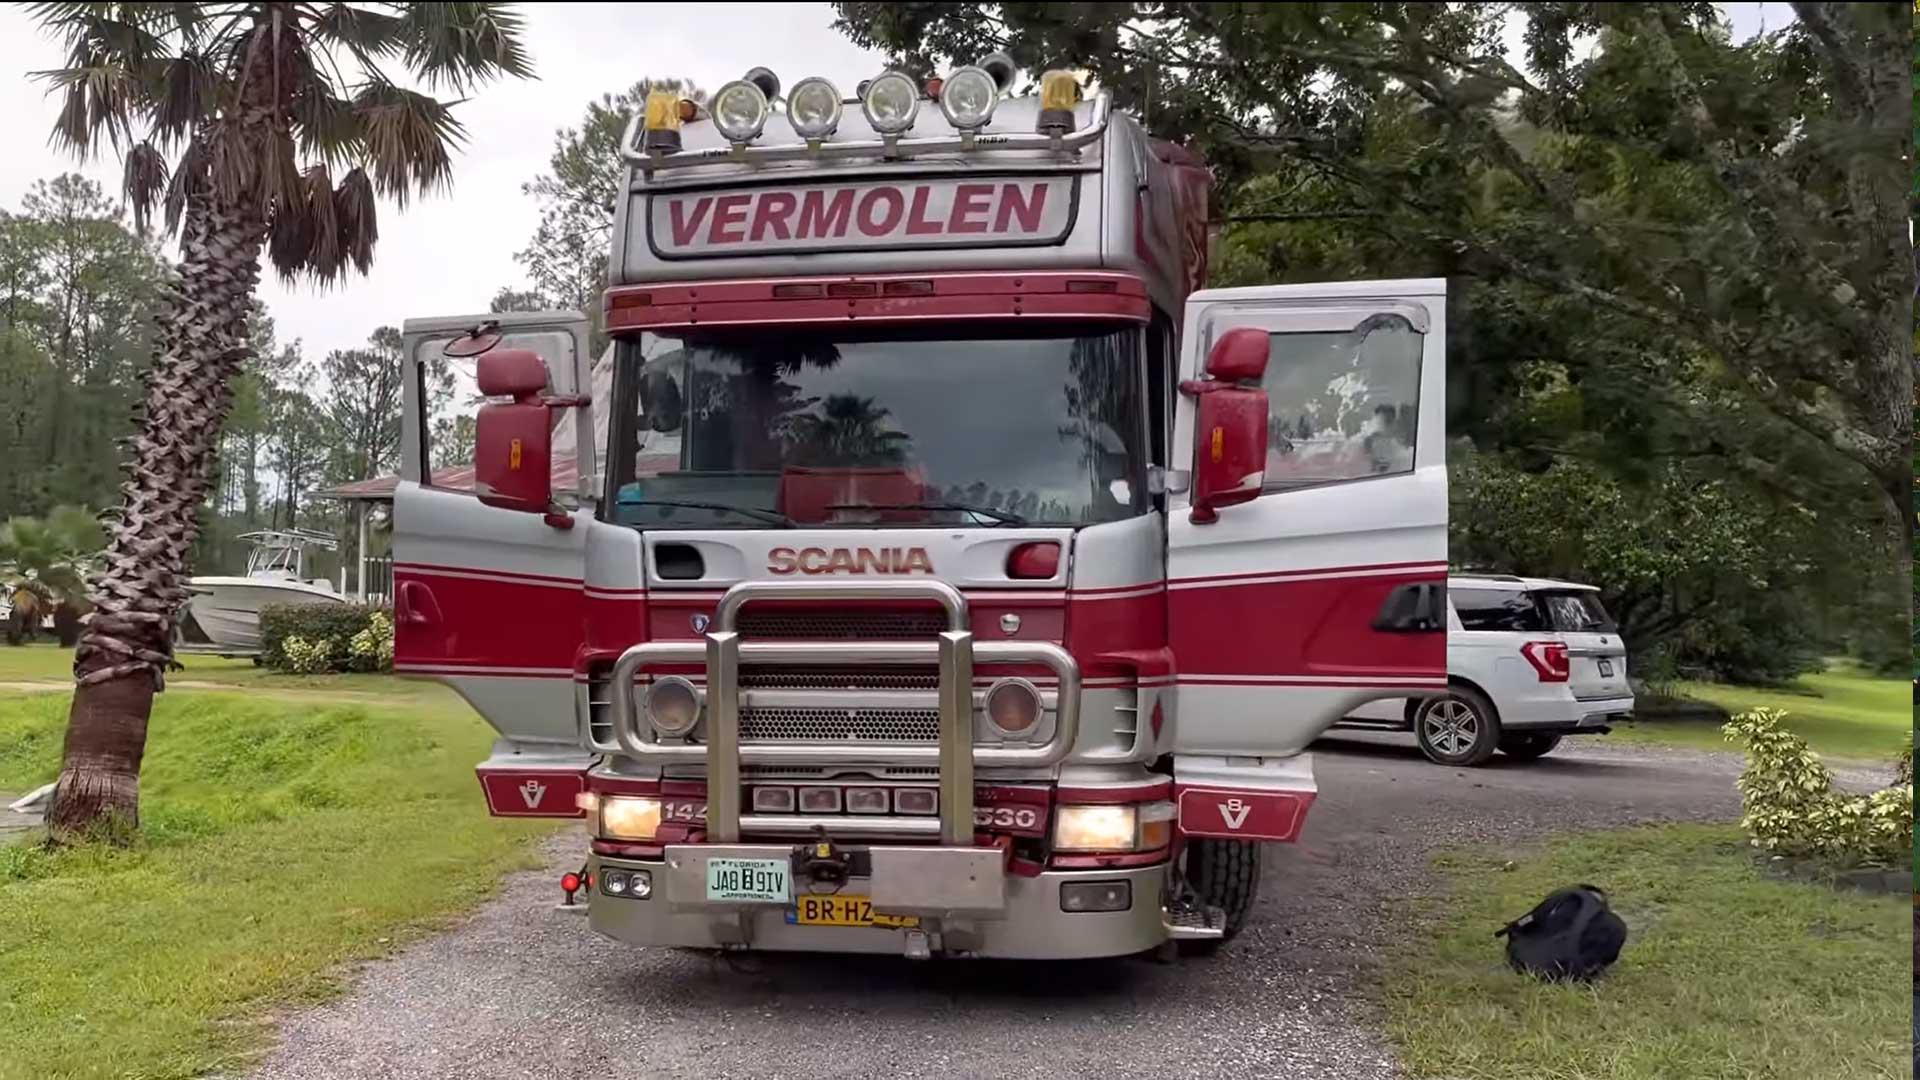 How this Dutch Scania V8 ended up in America